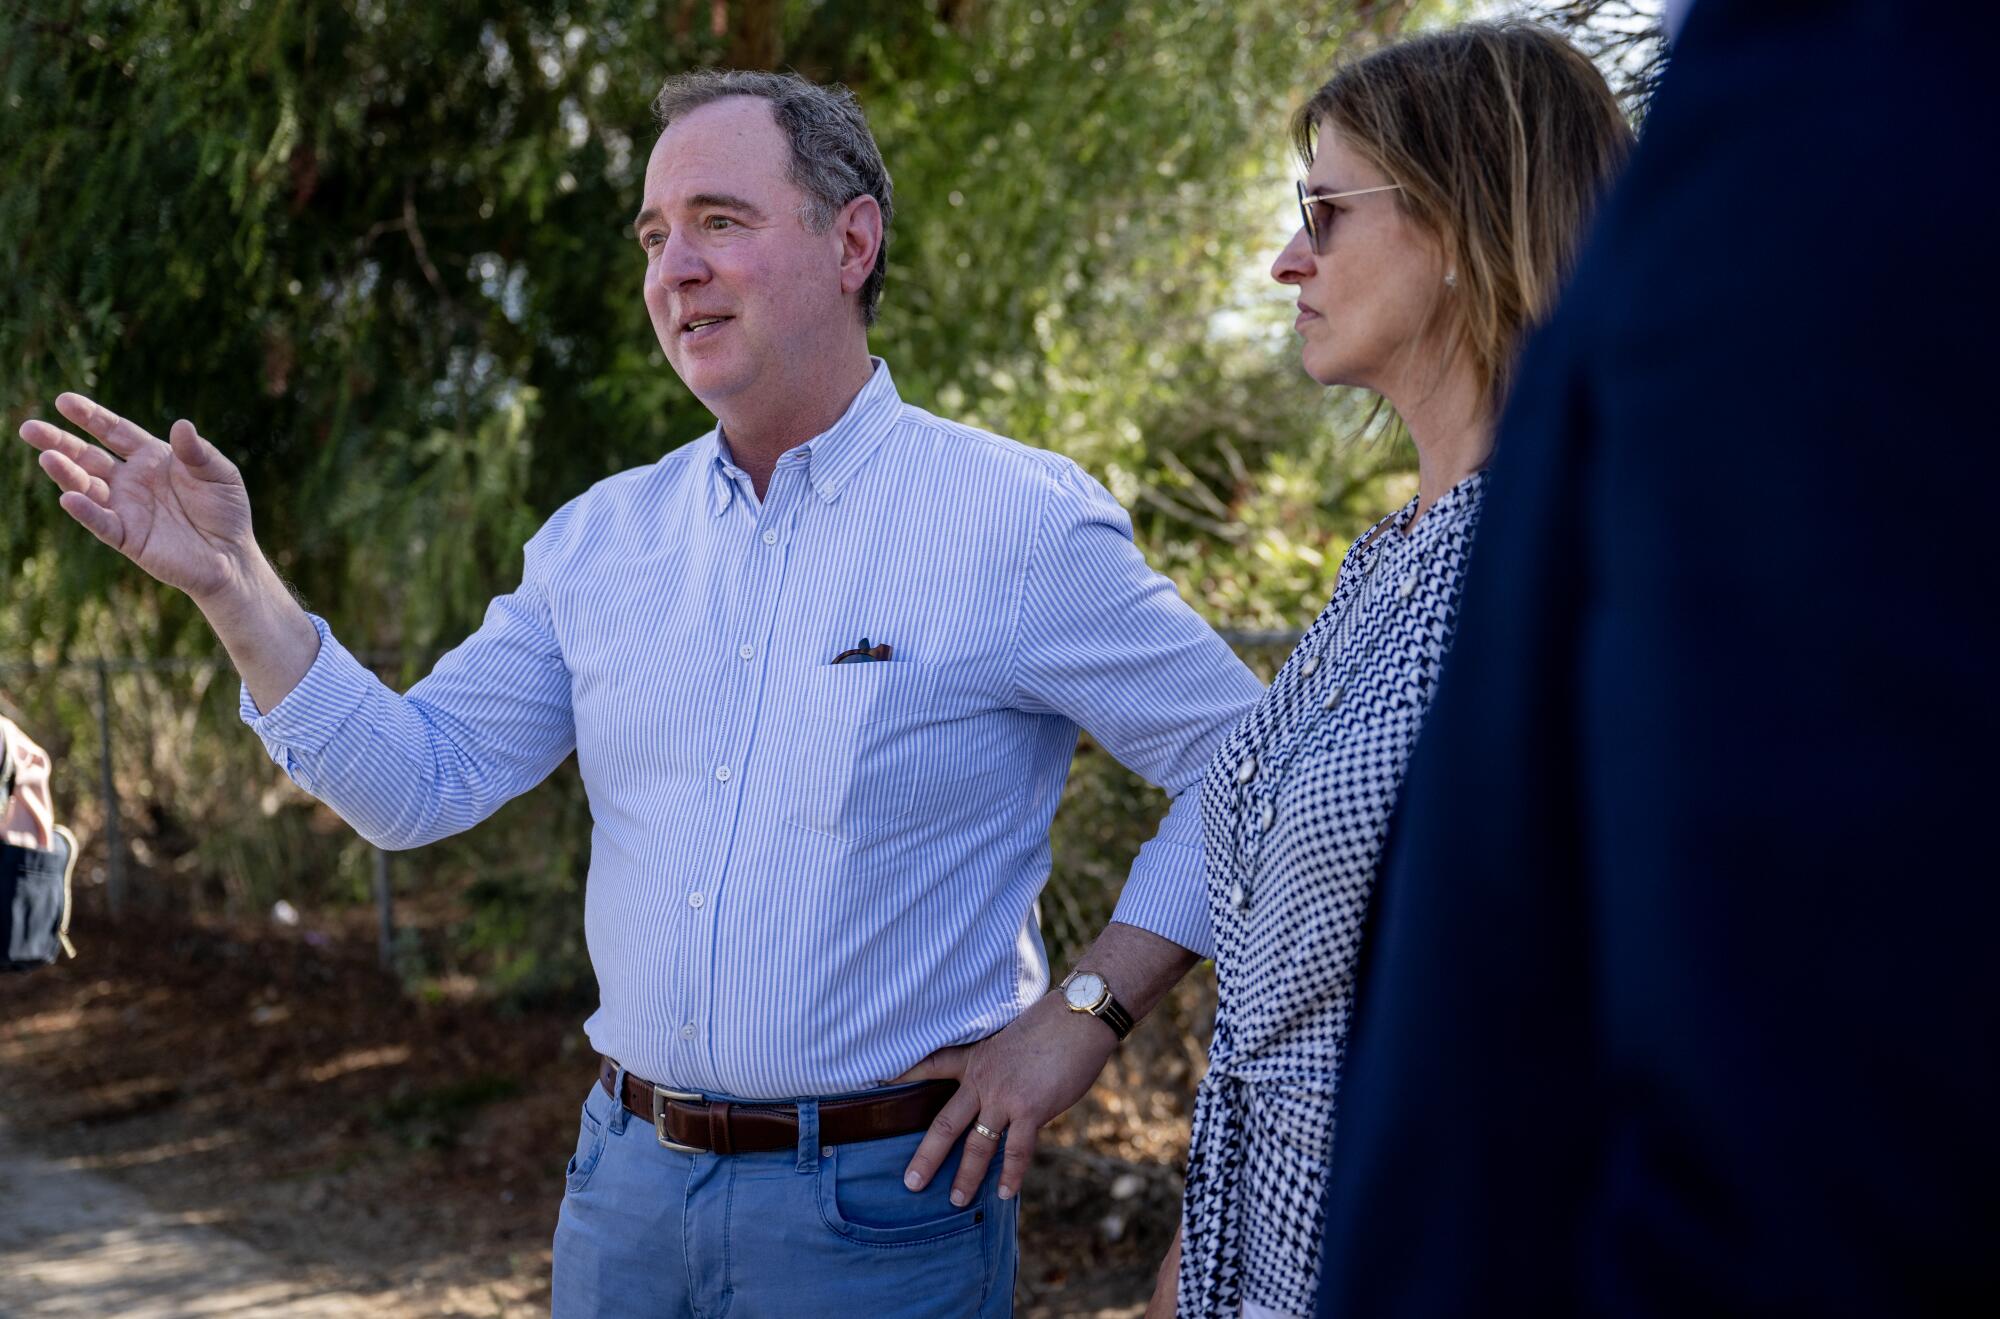 Adam Schiff standing next to a woman outdoors, gesturing as he speaks to people outside the frame